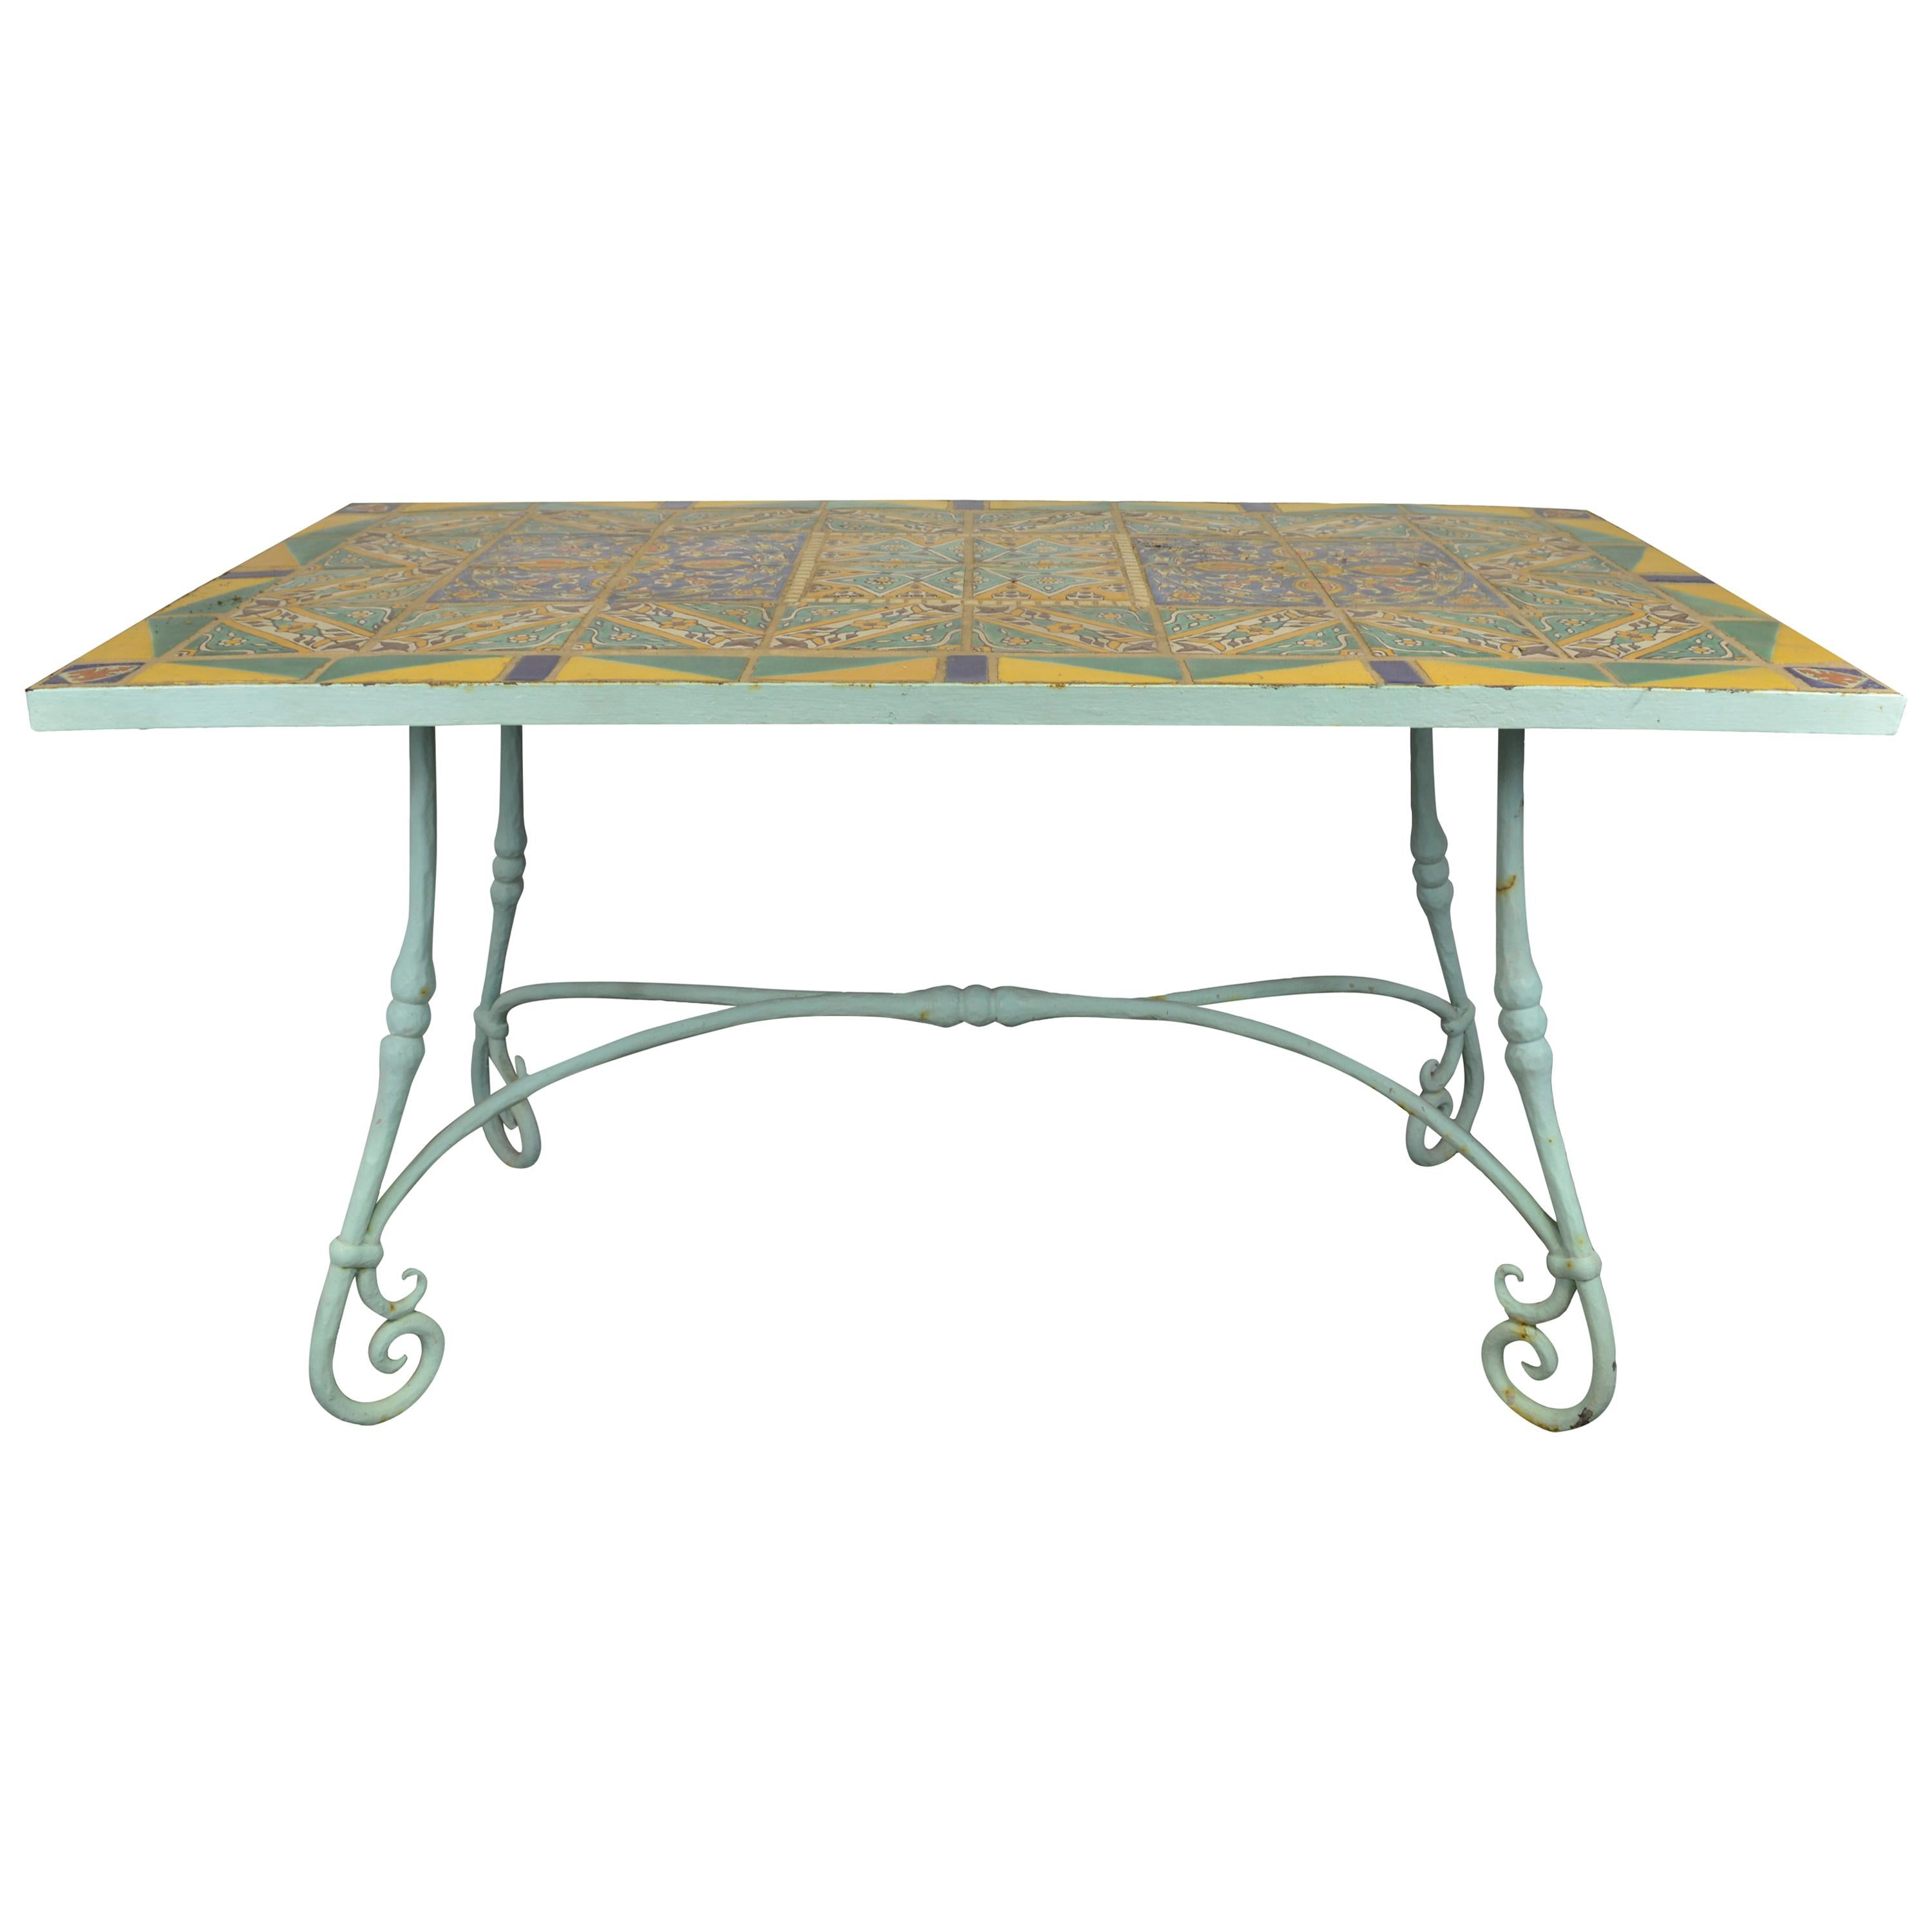 Rare Original D&M Tile Table with Handwrought Iron Base For Sale